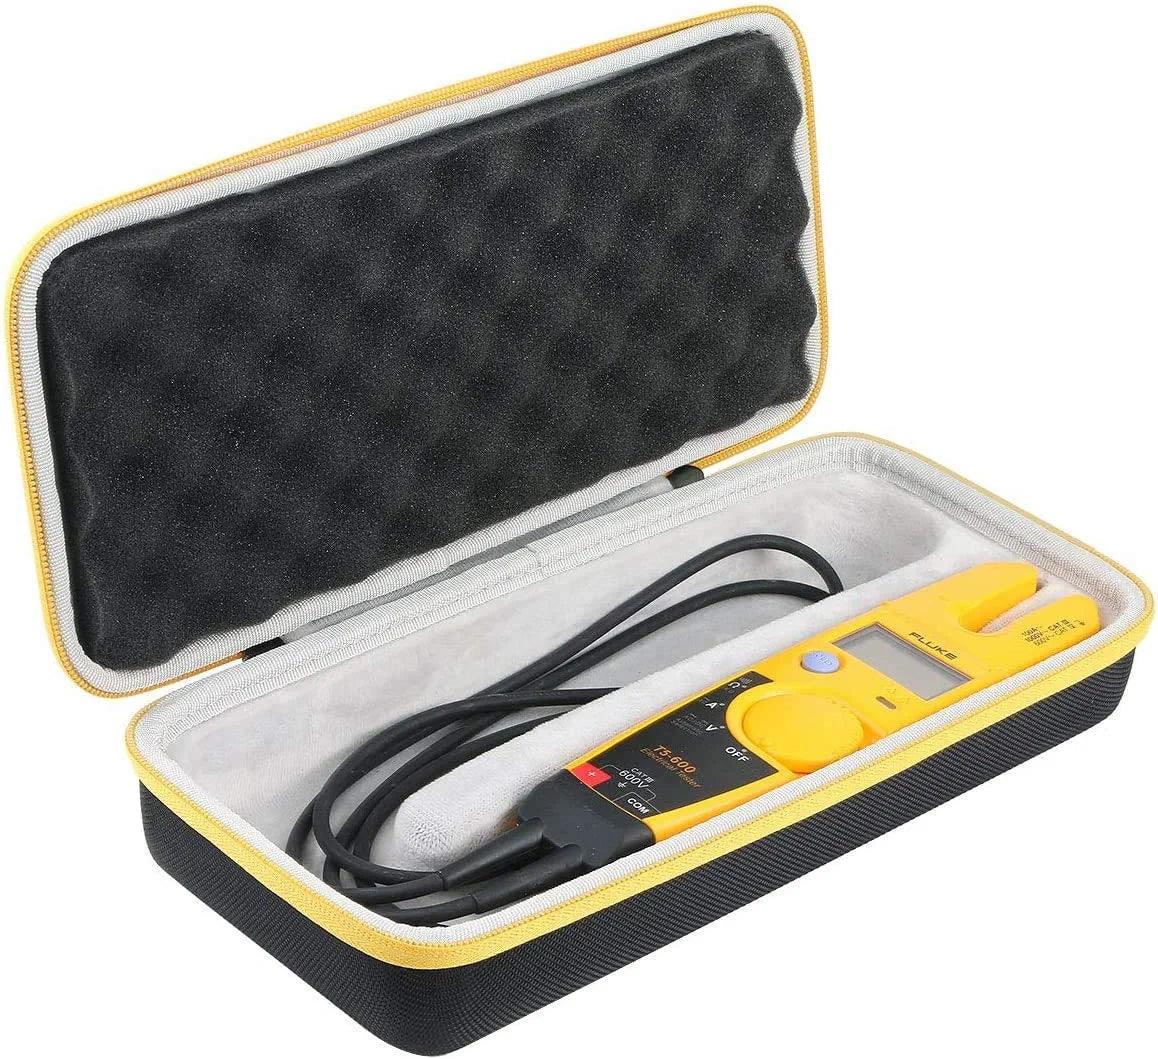 Hard Case Replacement for Fluke T5-1000/T5-600/T6-1000/T6-600 Electrical Voltage Current Tester